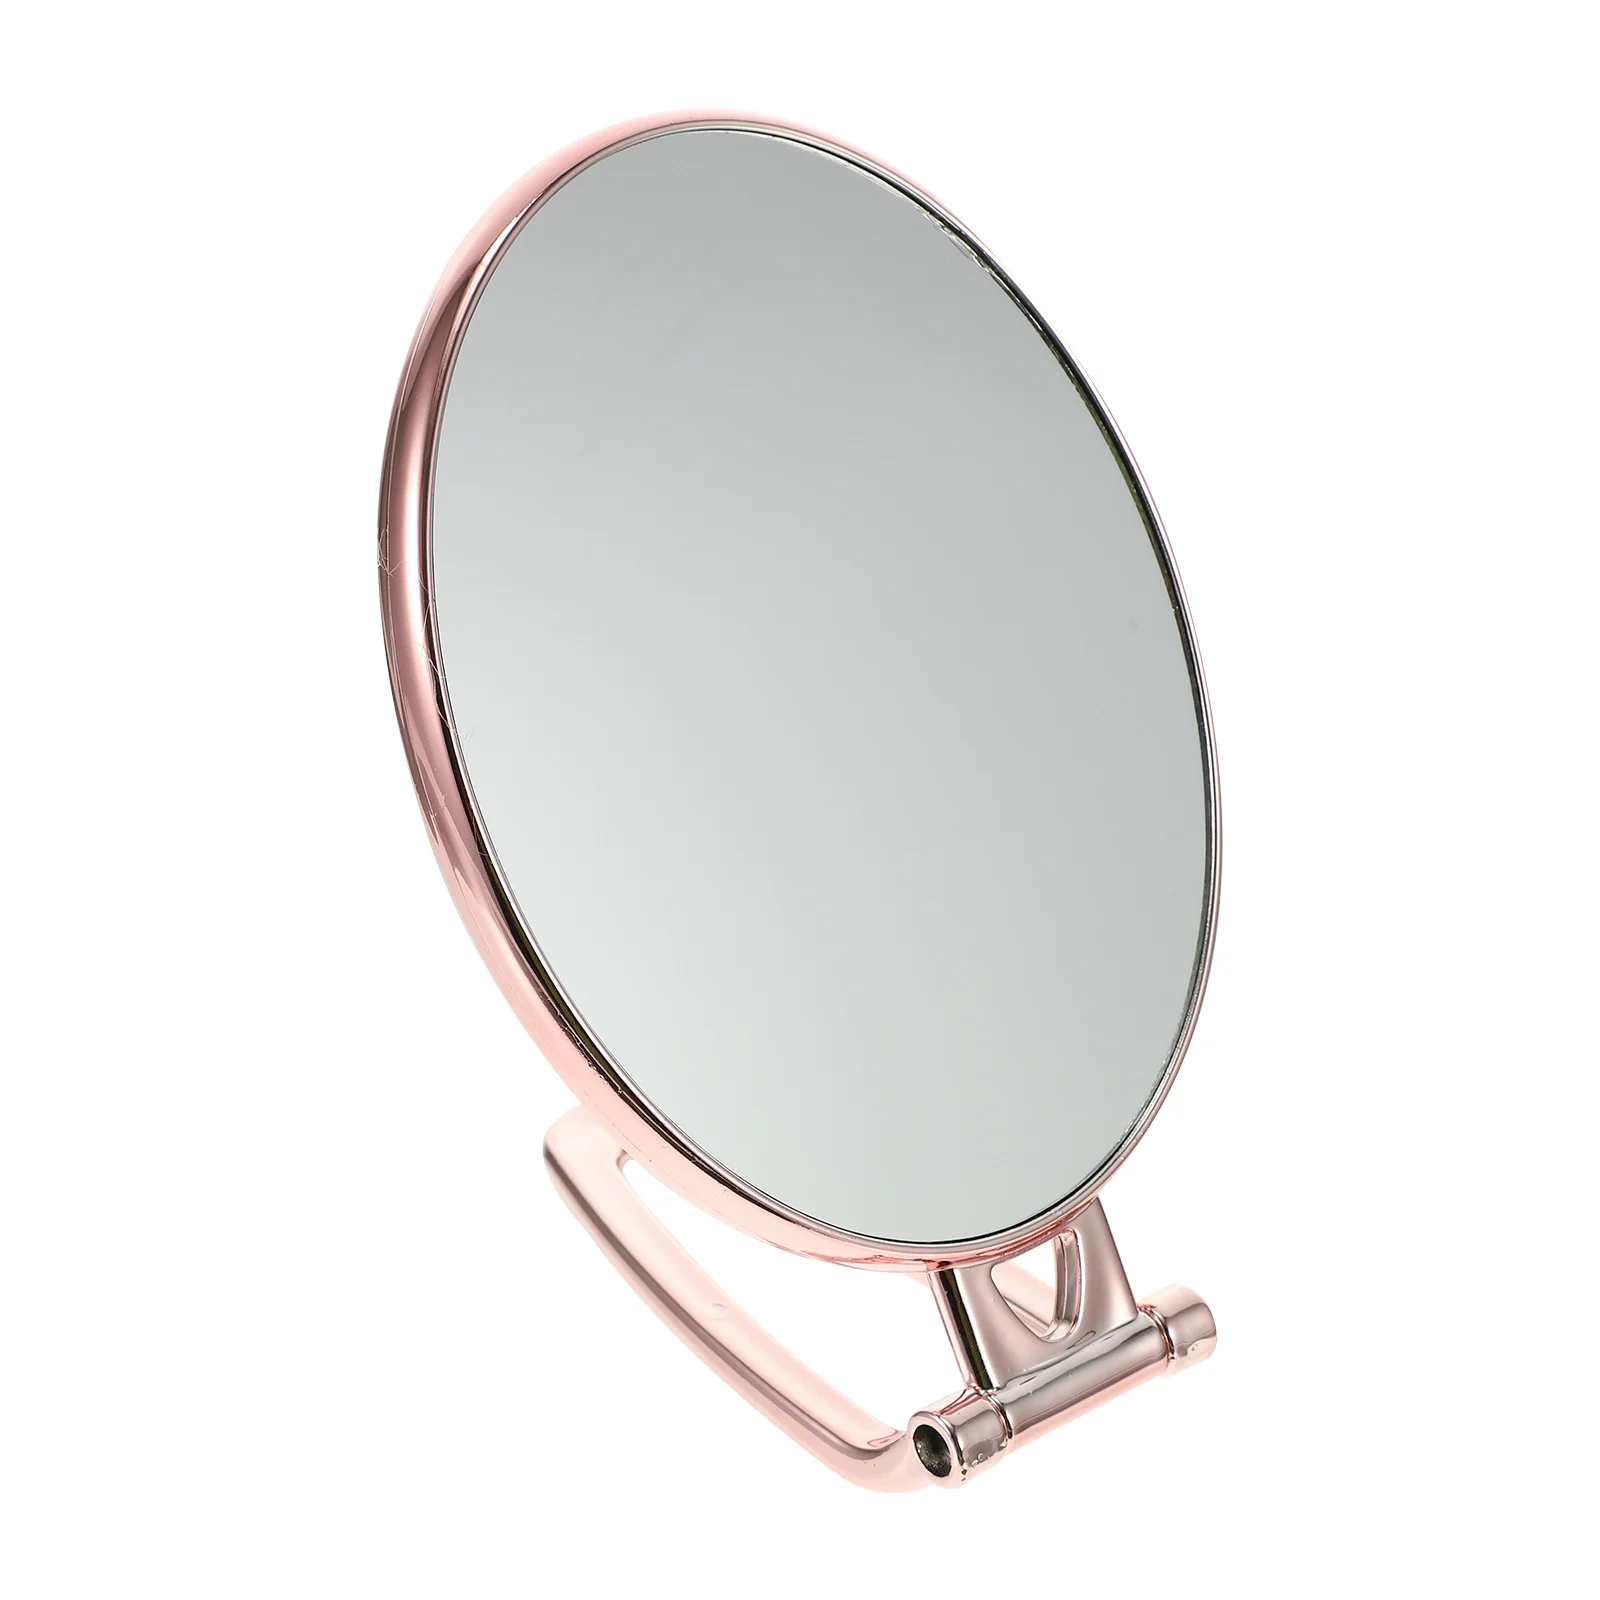 

Vanity Mirror Pedestal Makeup Compact Magnifying Double Sided Travel with Handle Handheld